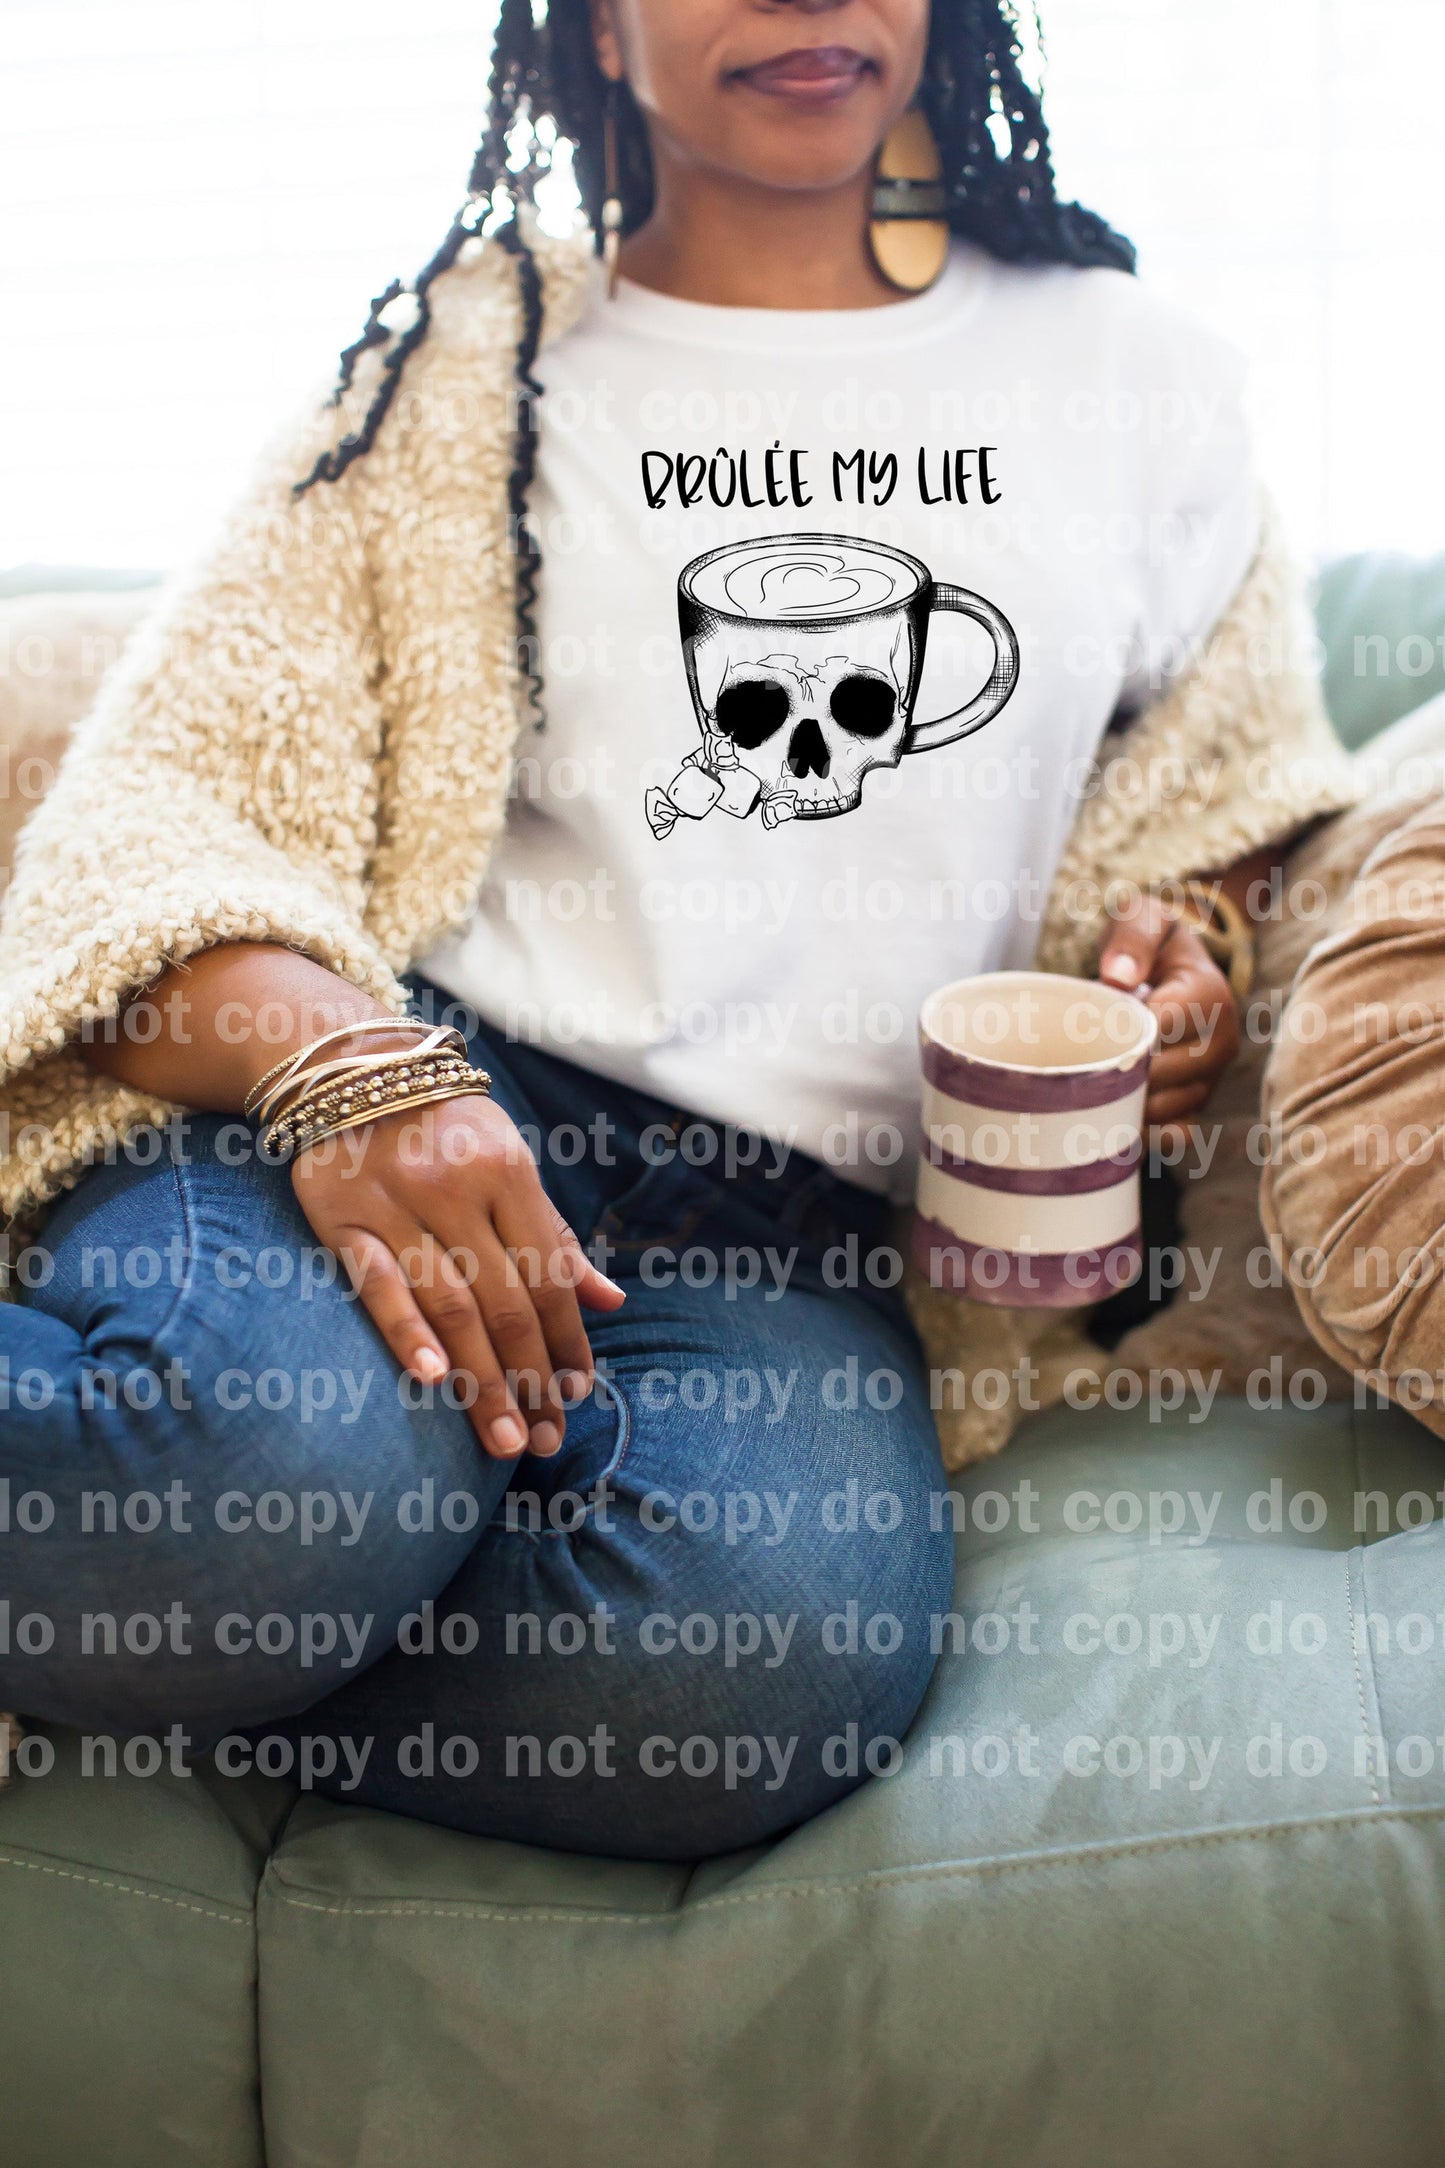 Brulee My Life Full Color/One Color Dream Print or Sublimation Print